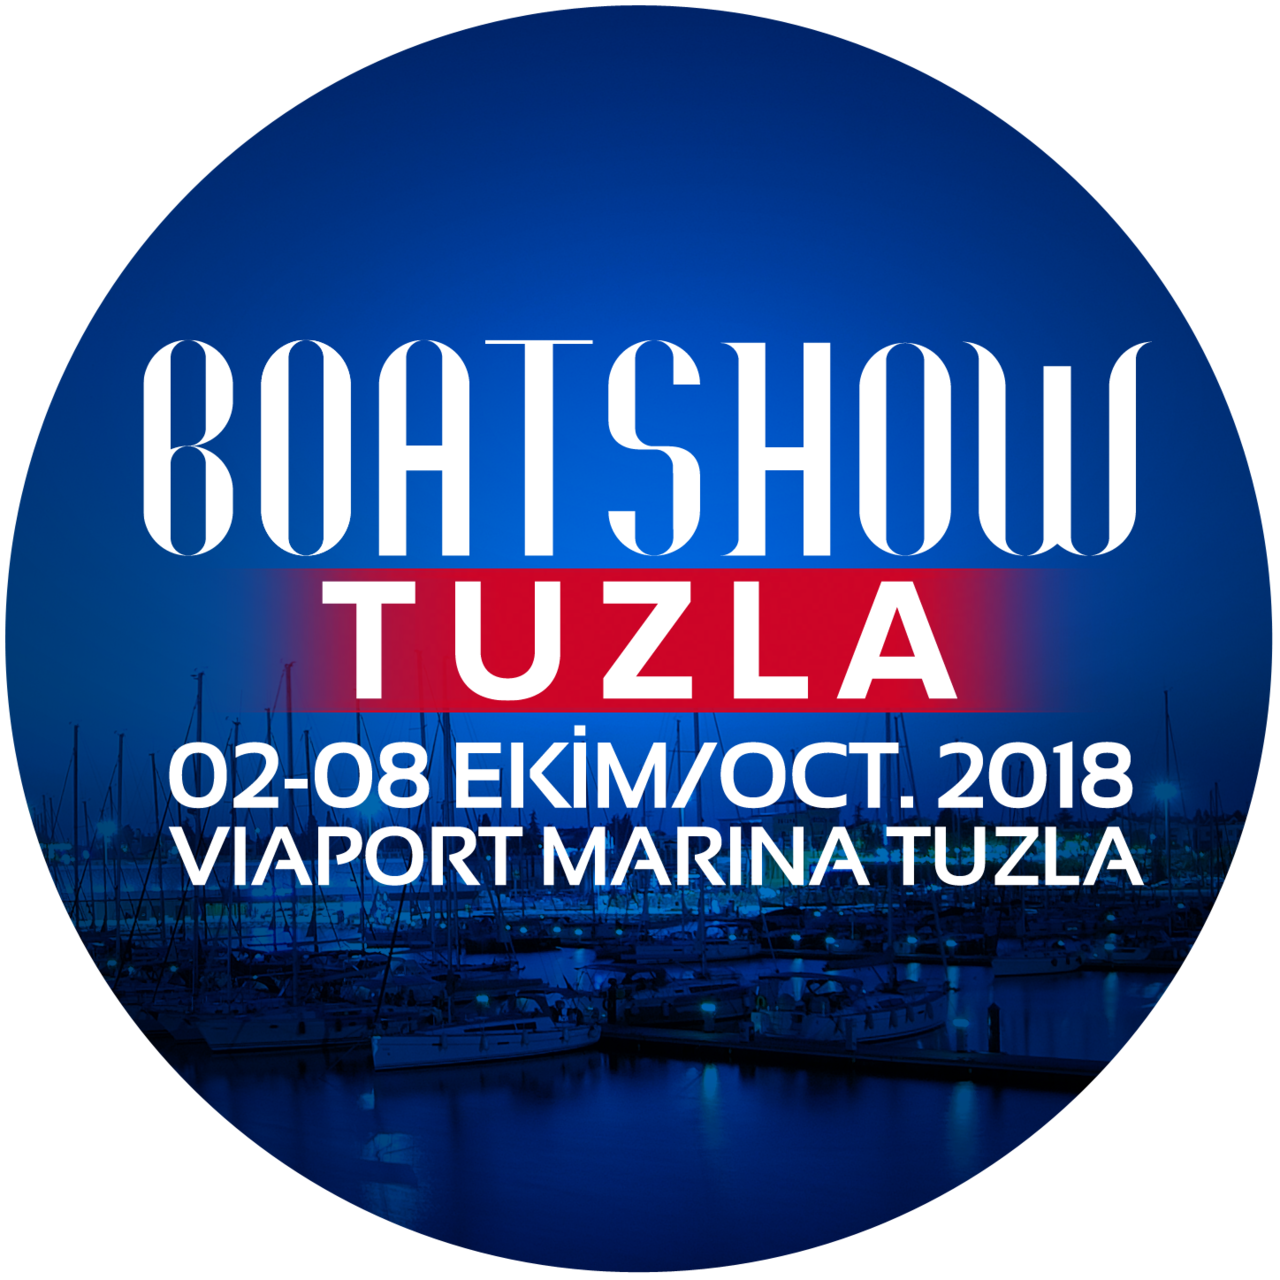 Messe boot auf Istanbul - Eurasia Boat Show